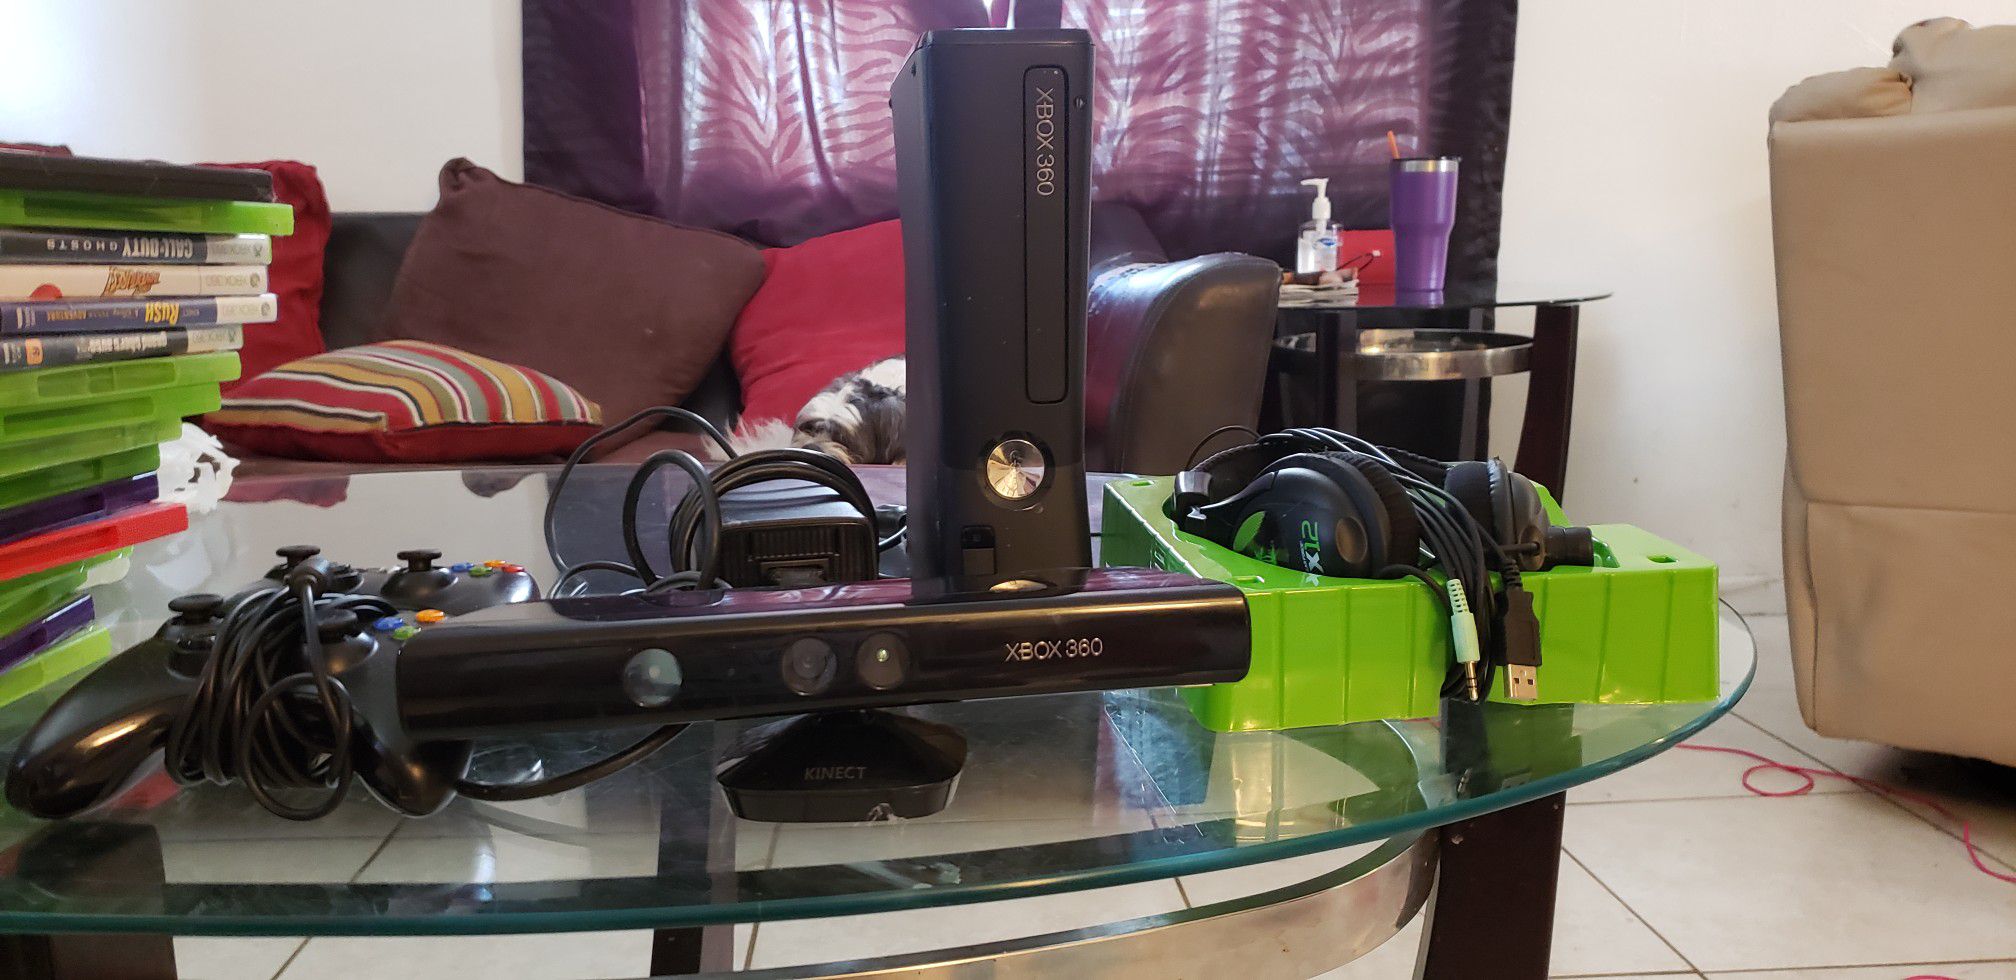 Fully loaded Xbox 360 with a Kinect and much more!!